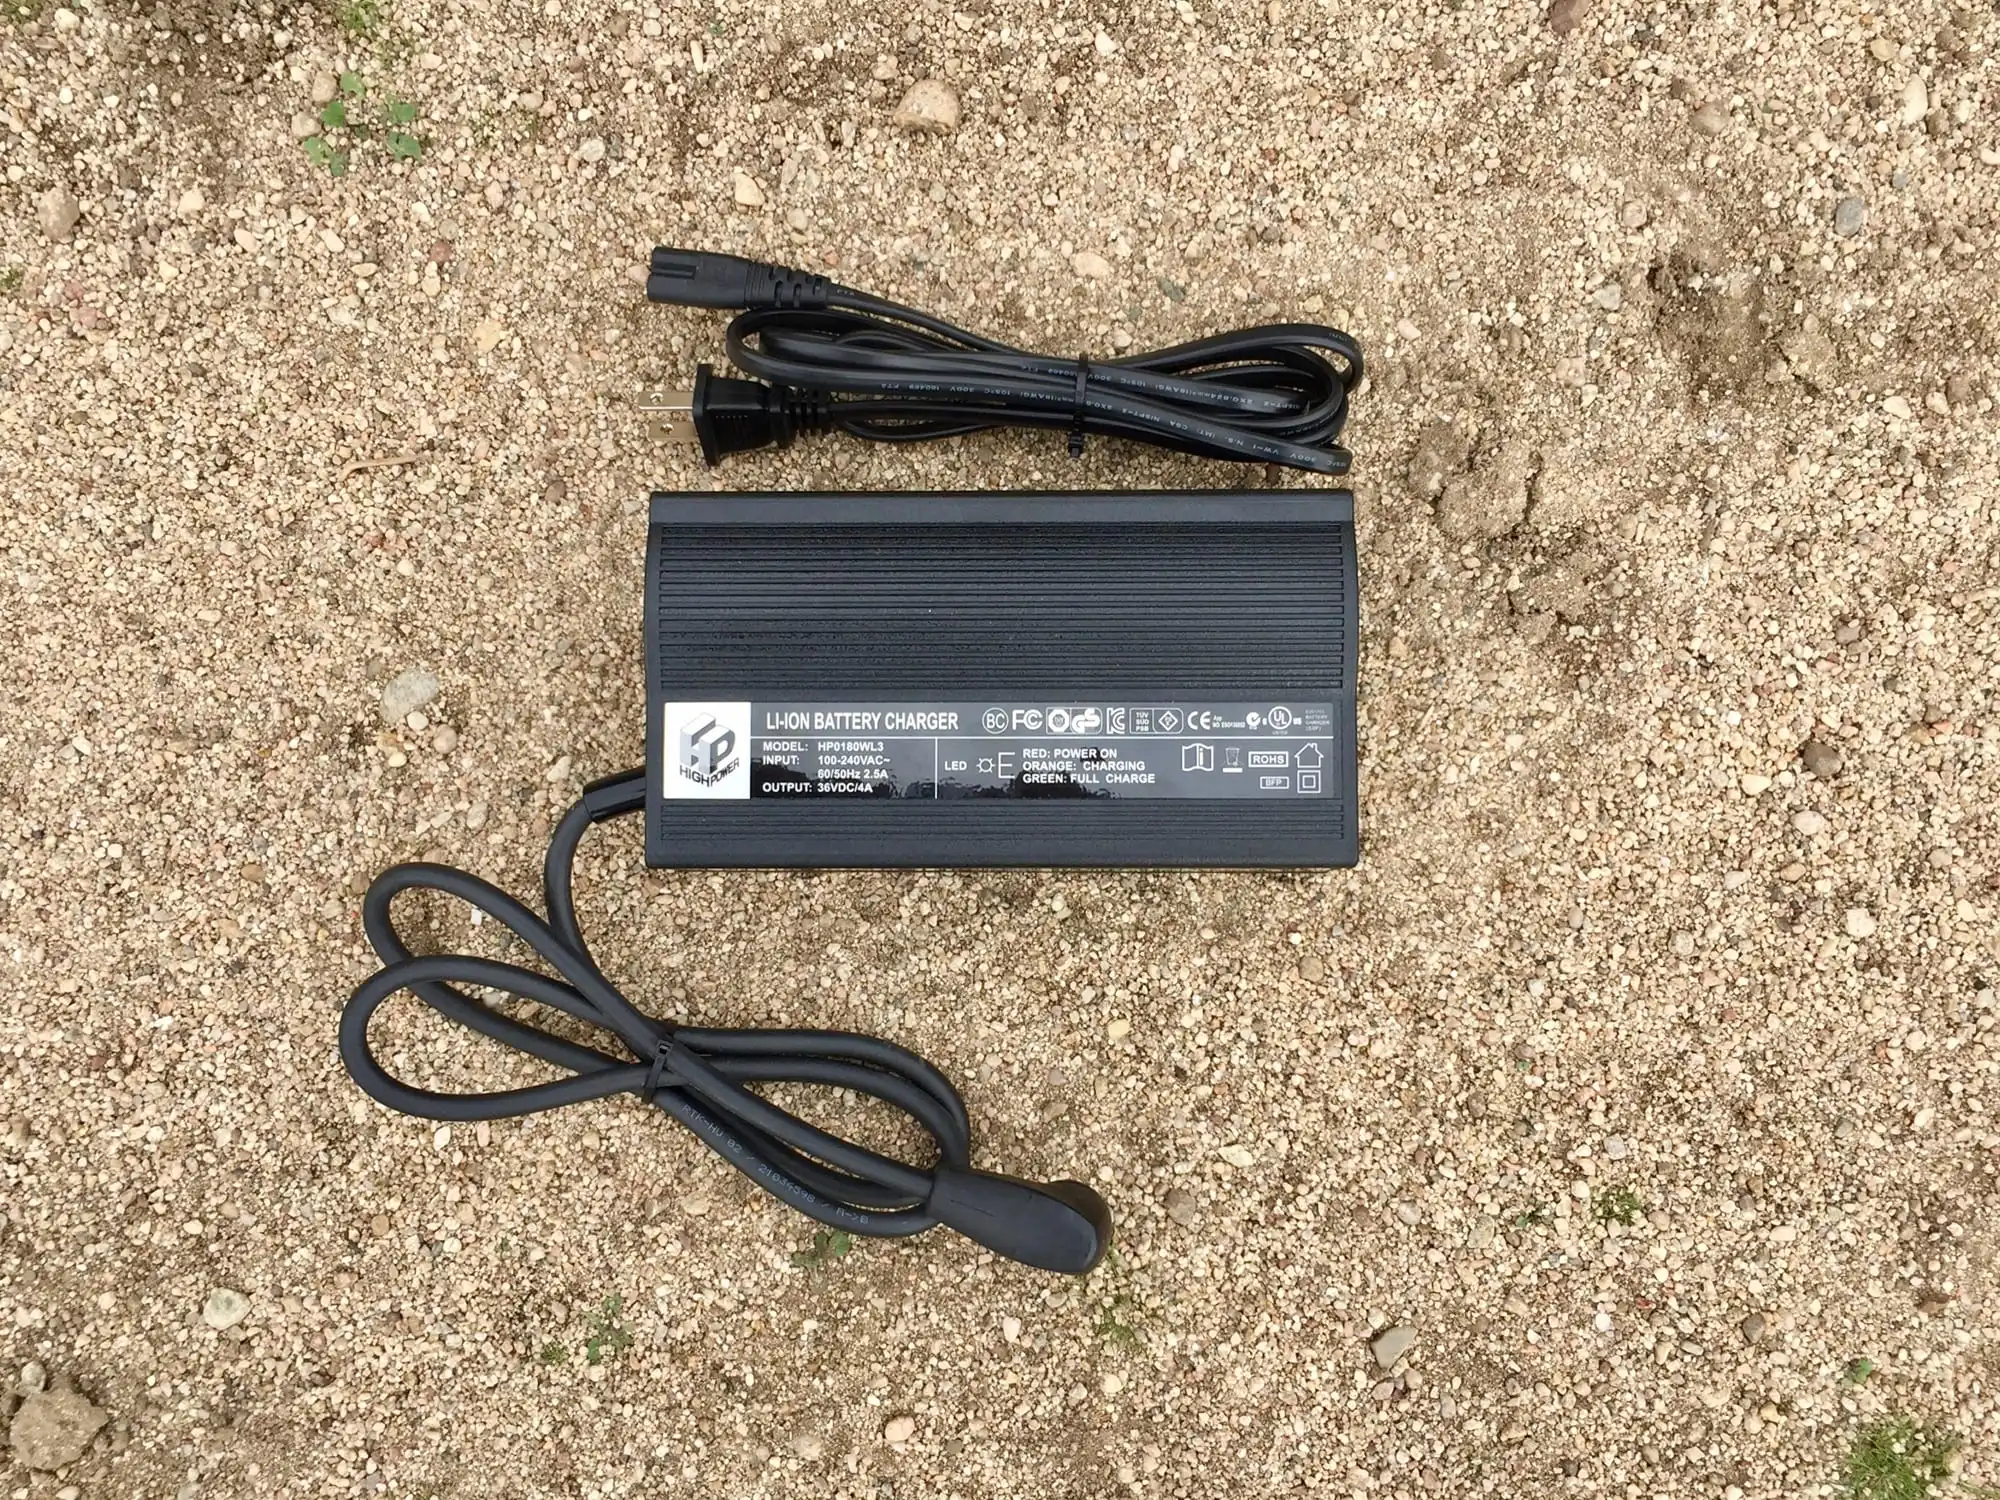 Vehicle Smart Charger - 48 Amp for Sale in Seattle, WA - OfferUp